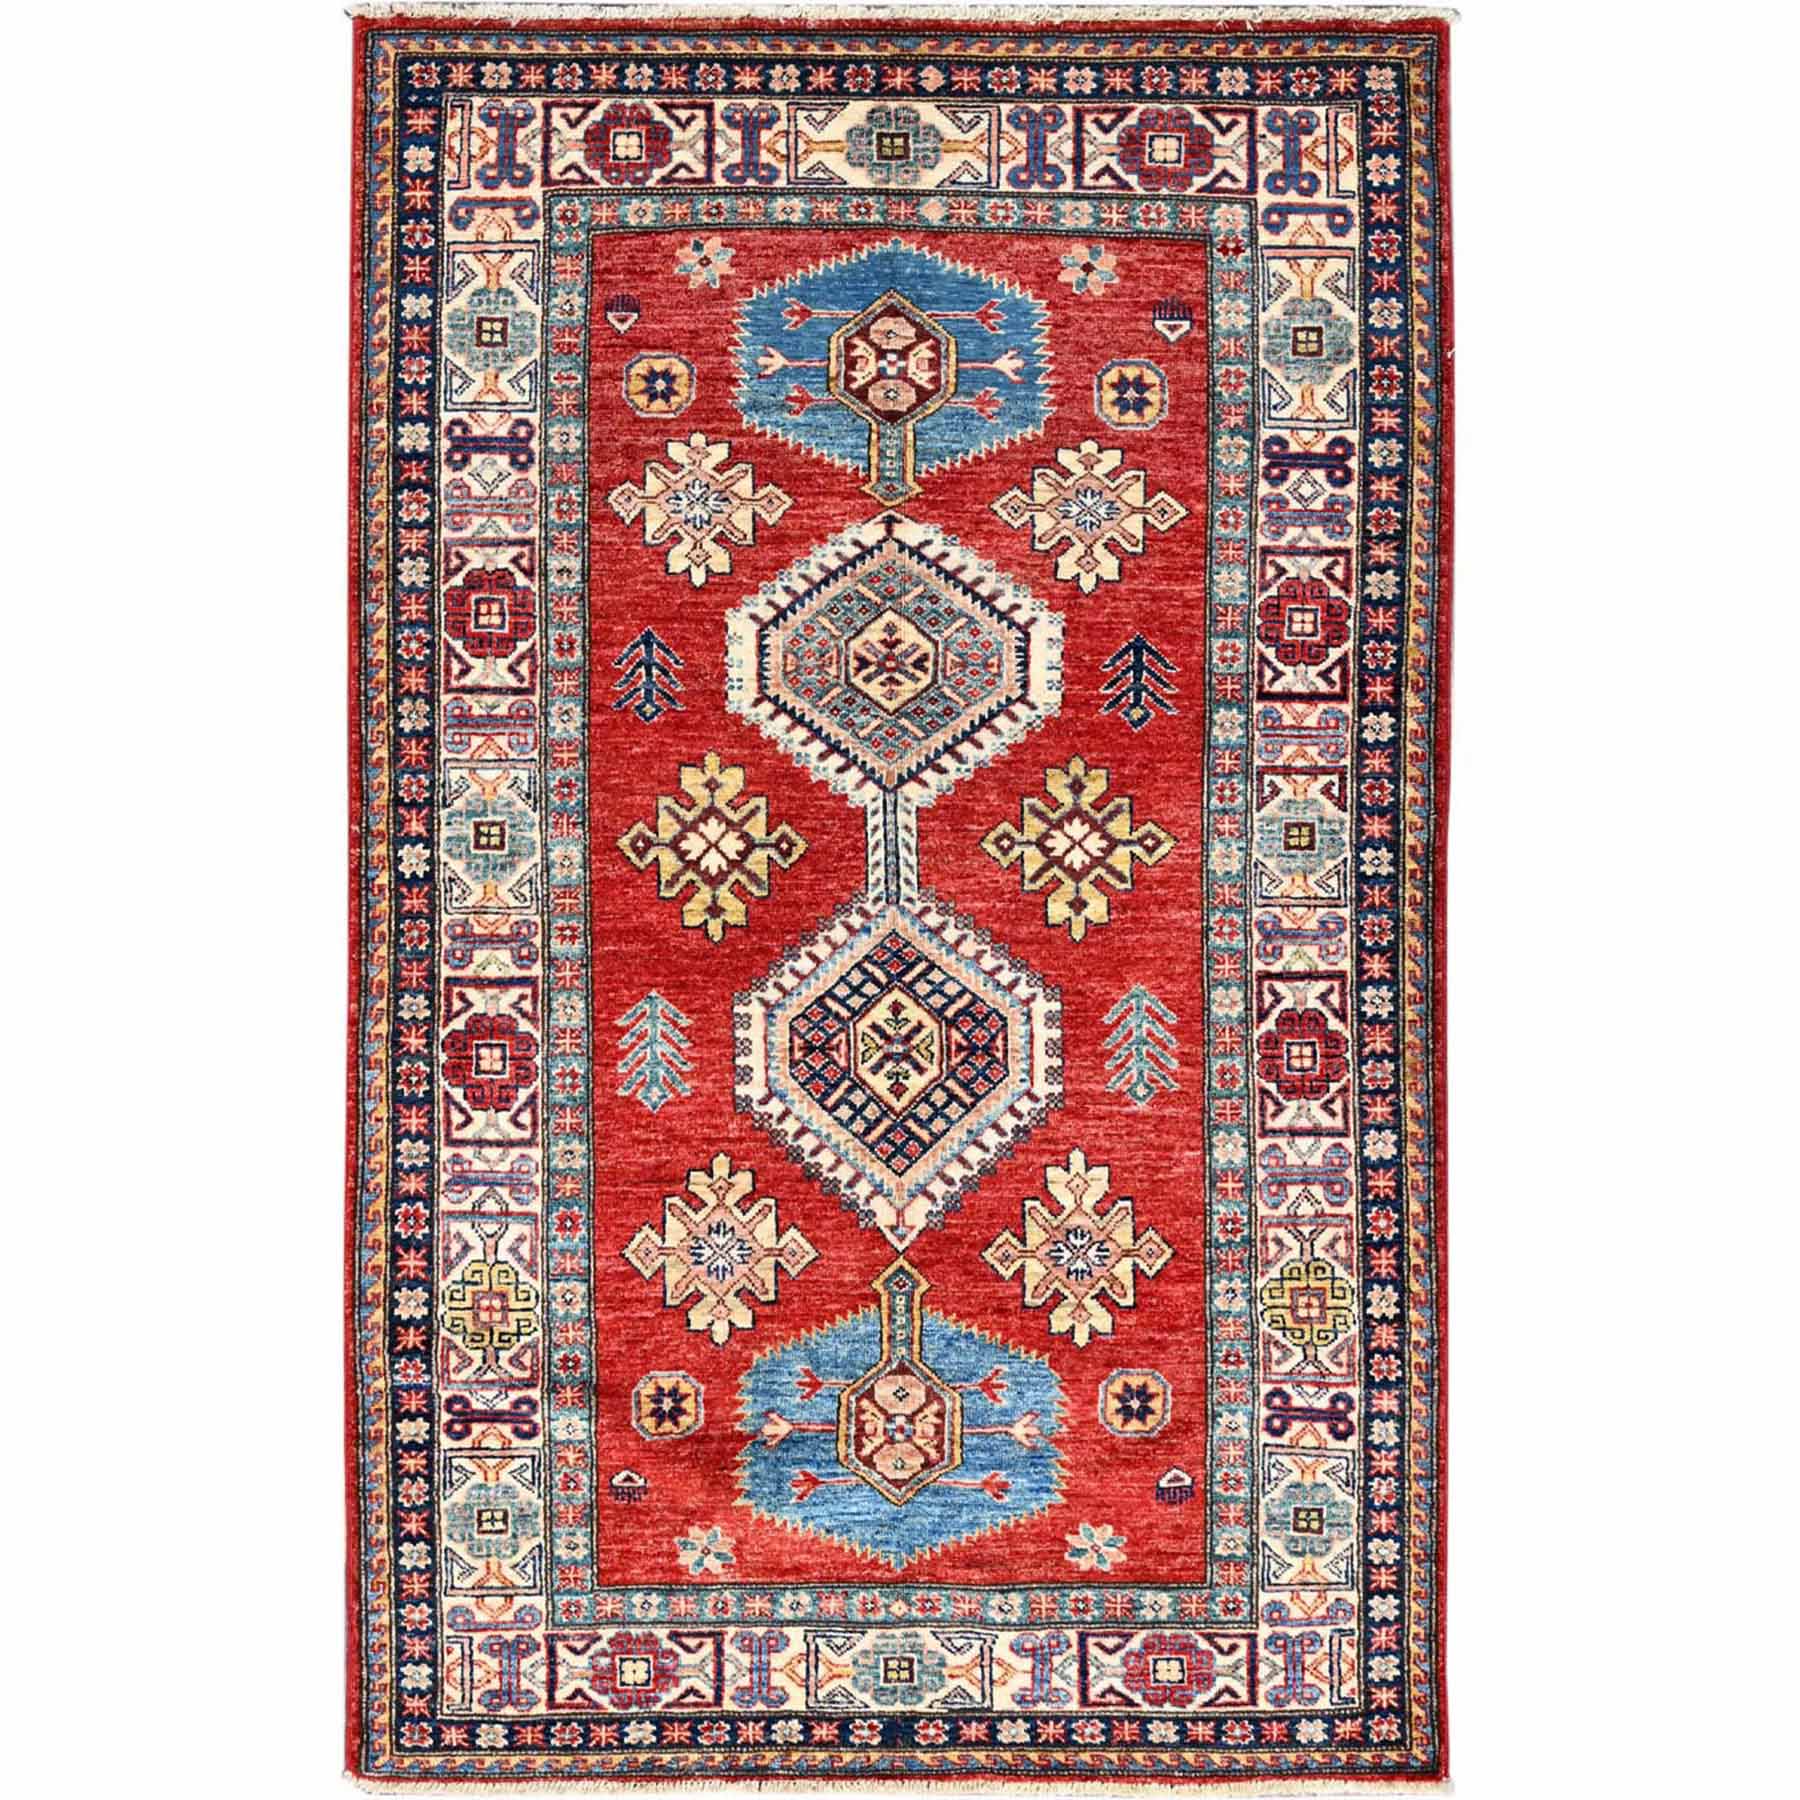 Lychee Red, Vegetable Dyes, Dense Weave Organic Wool, Hand Knotted Afghan Super Kazak with Tribal Geometric Medallions, Oriental Rug